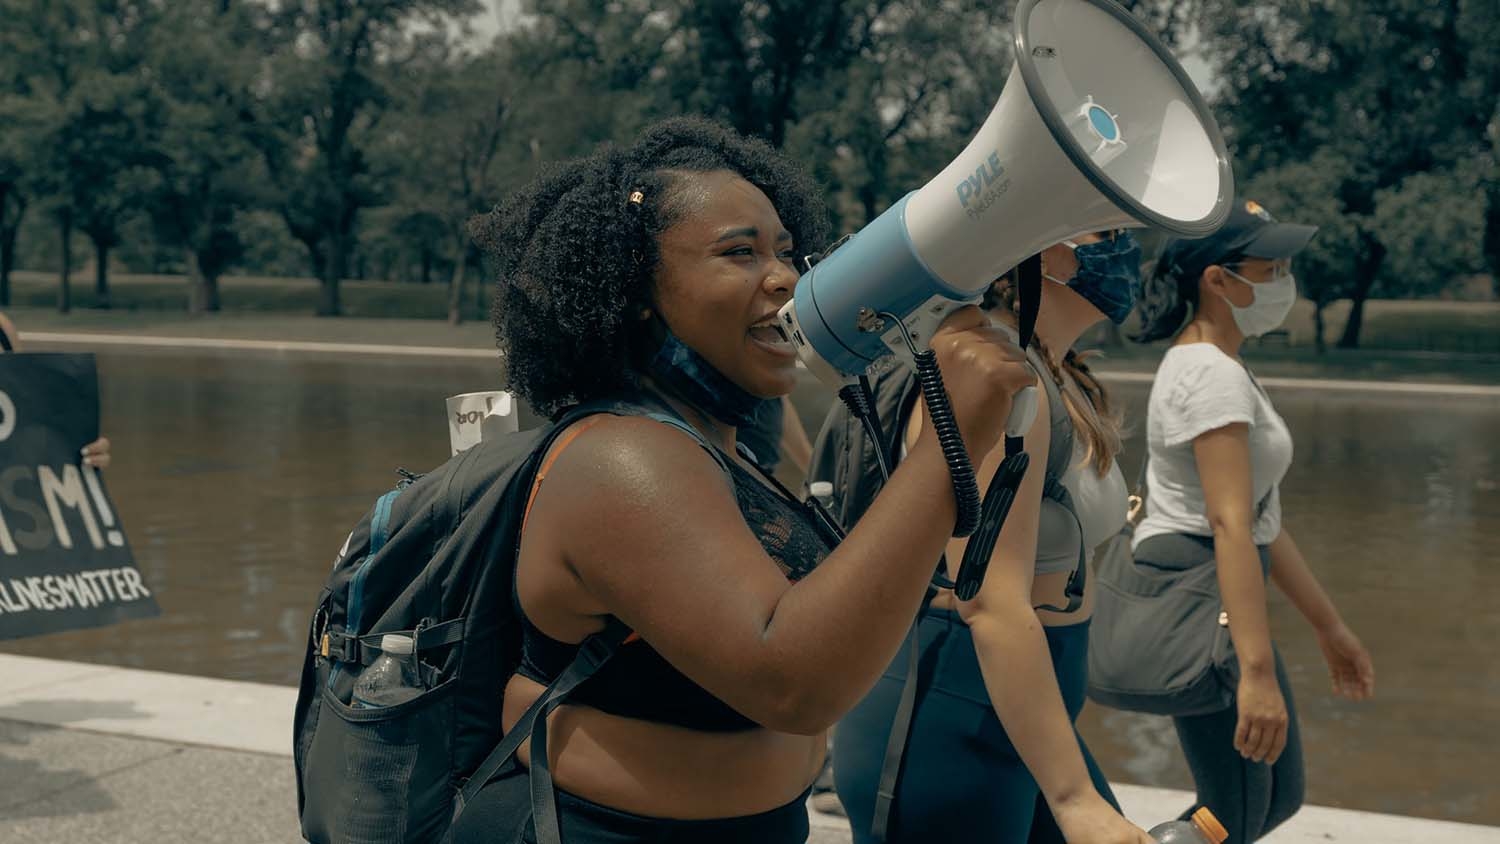 young woman speaking into a megaphone